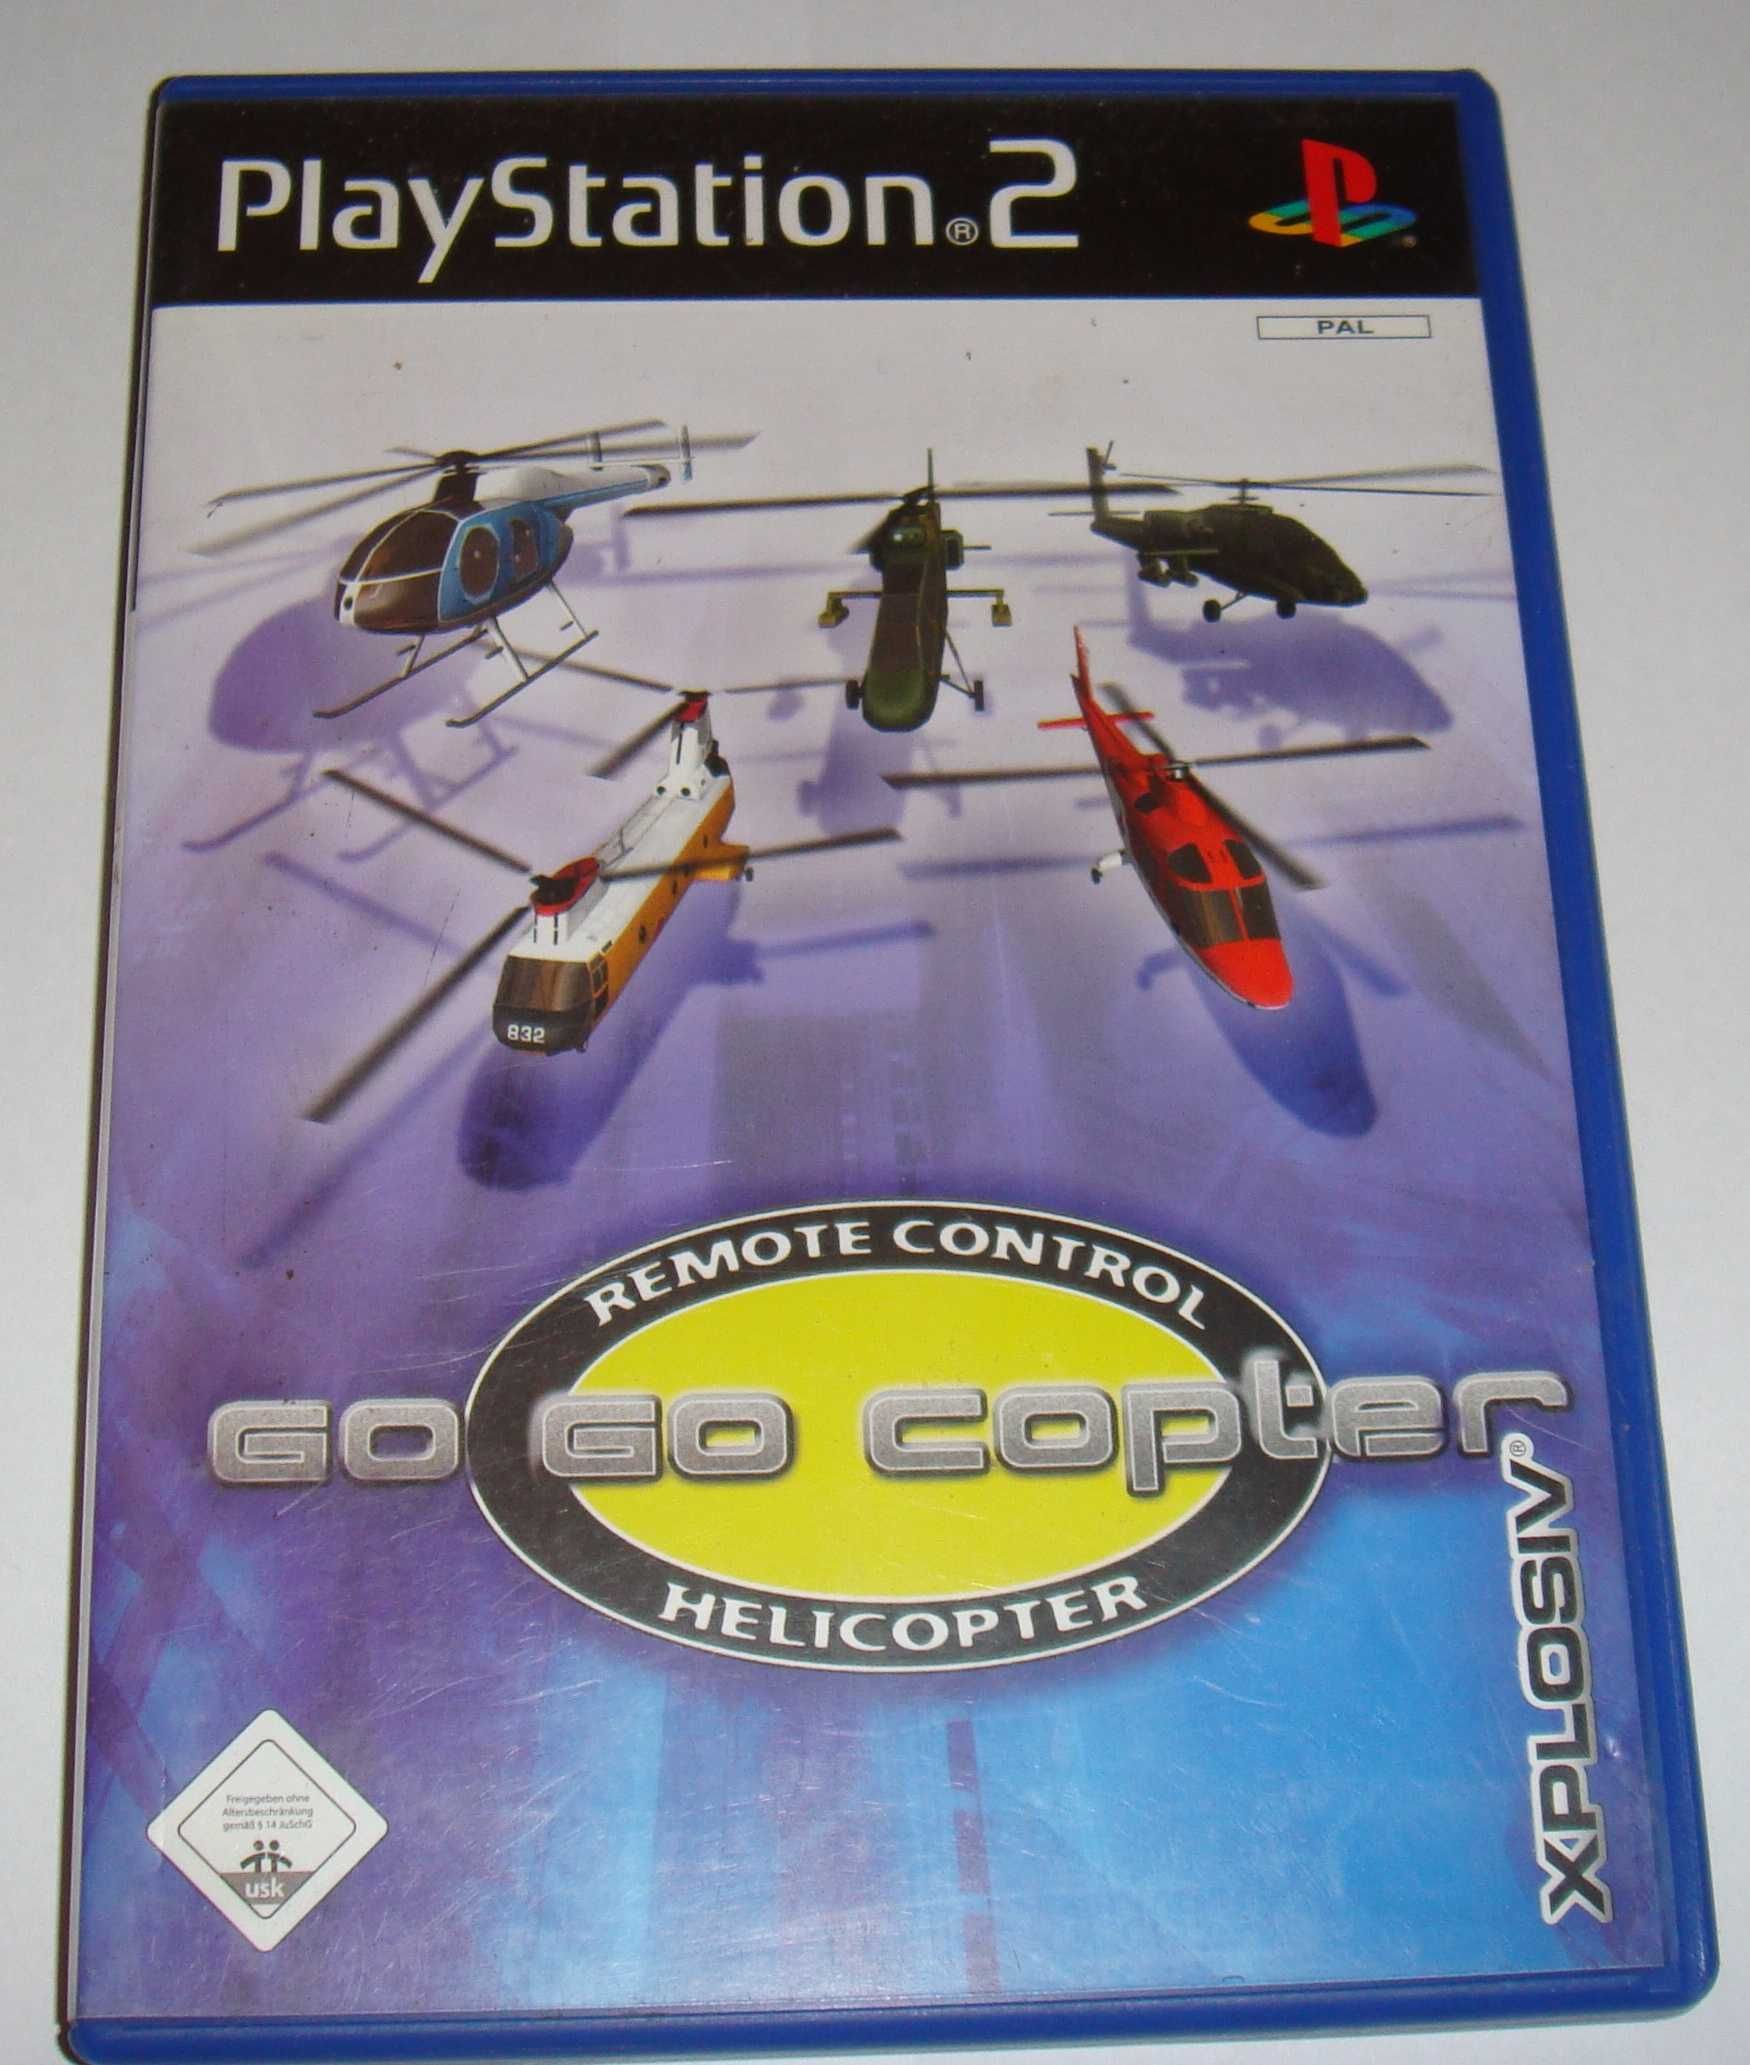 Go GO Copter (ps2)